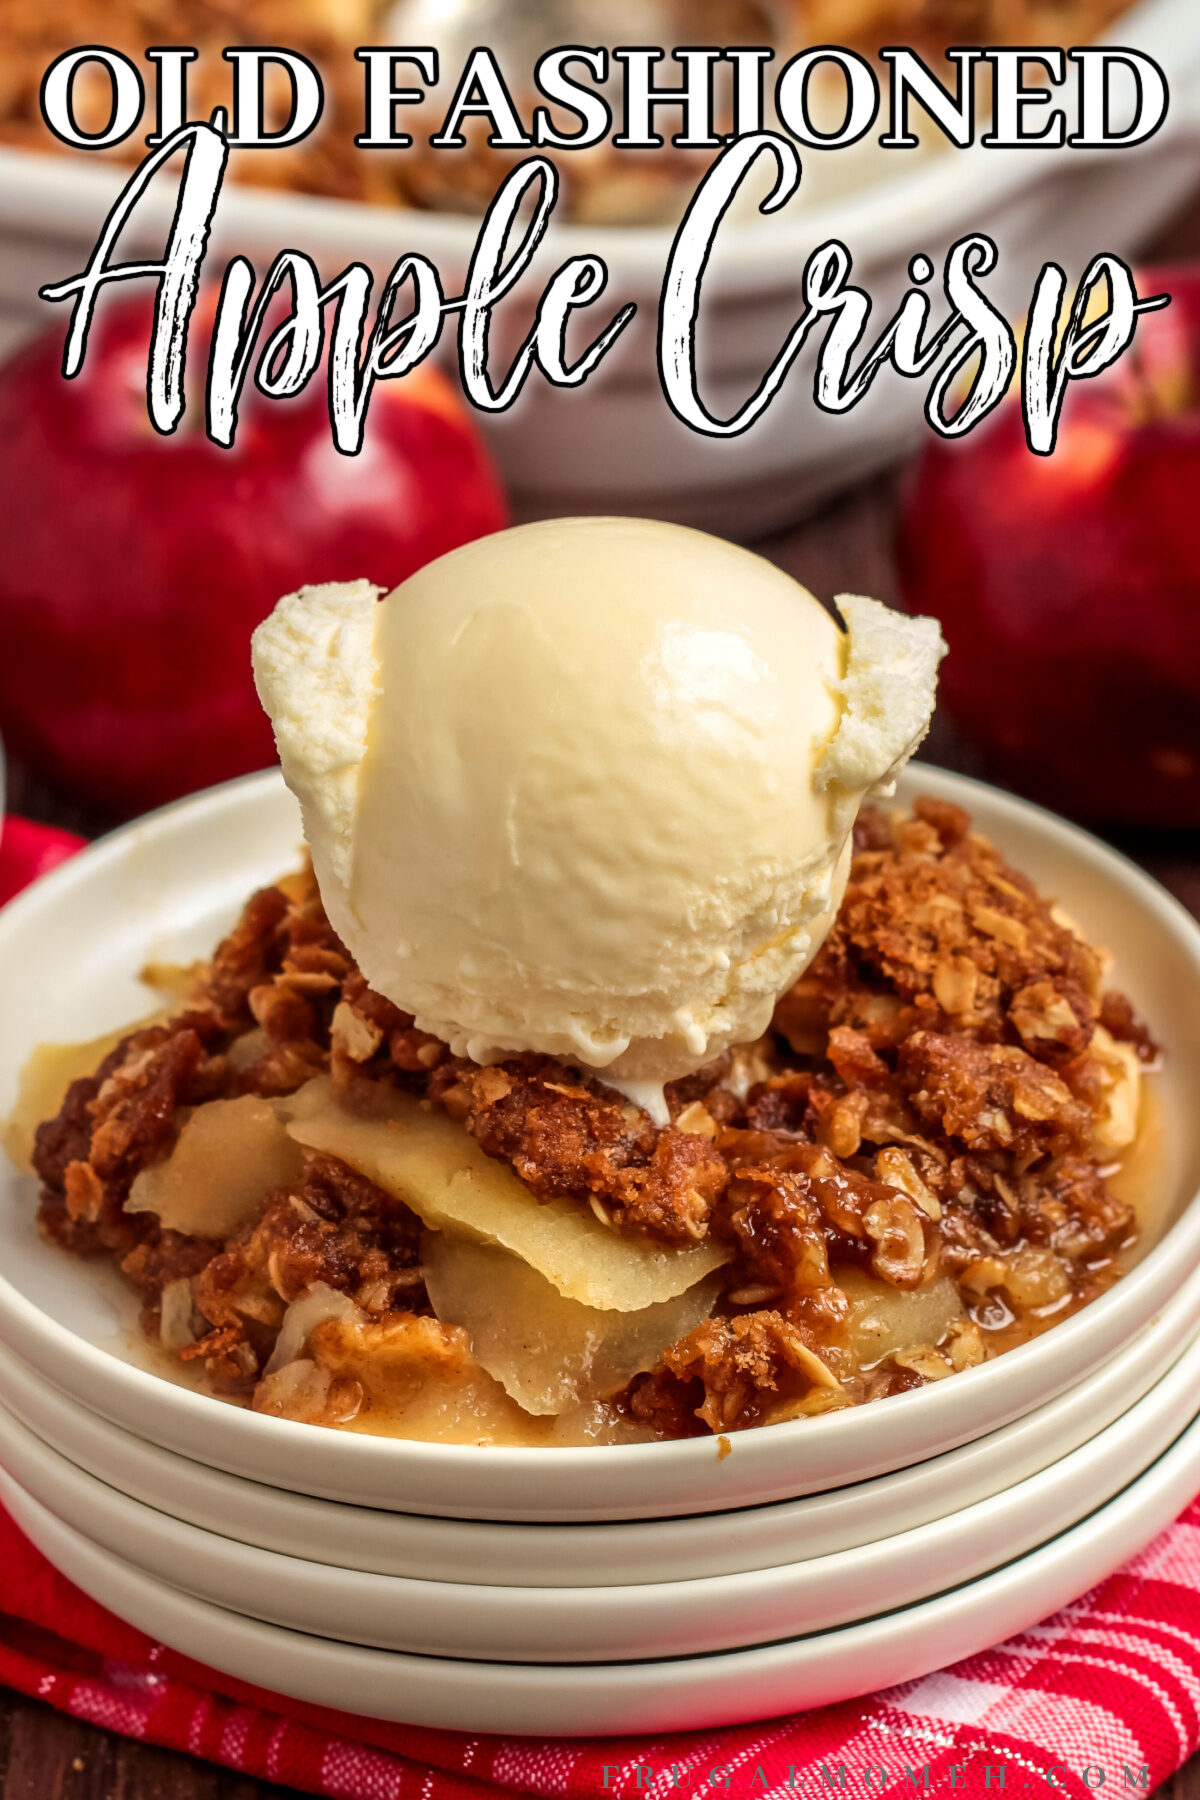 A classic, old fashioned apple crisp recipe, made with fresh apples and a crispy oat topping. It's simple, delicious and sure to please!